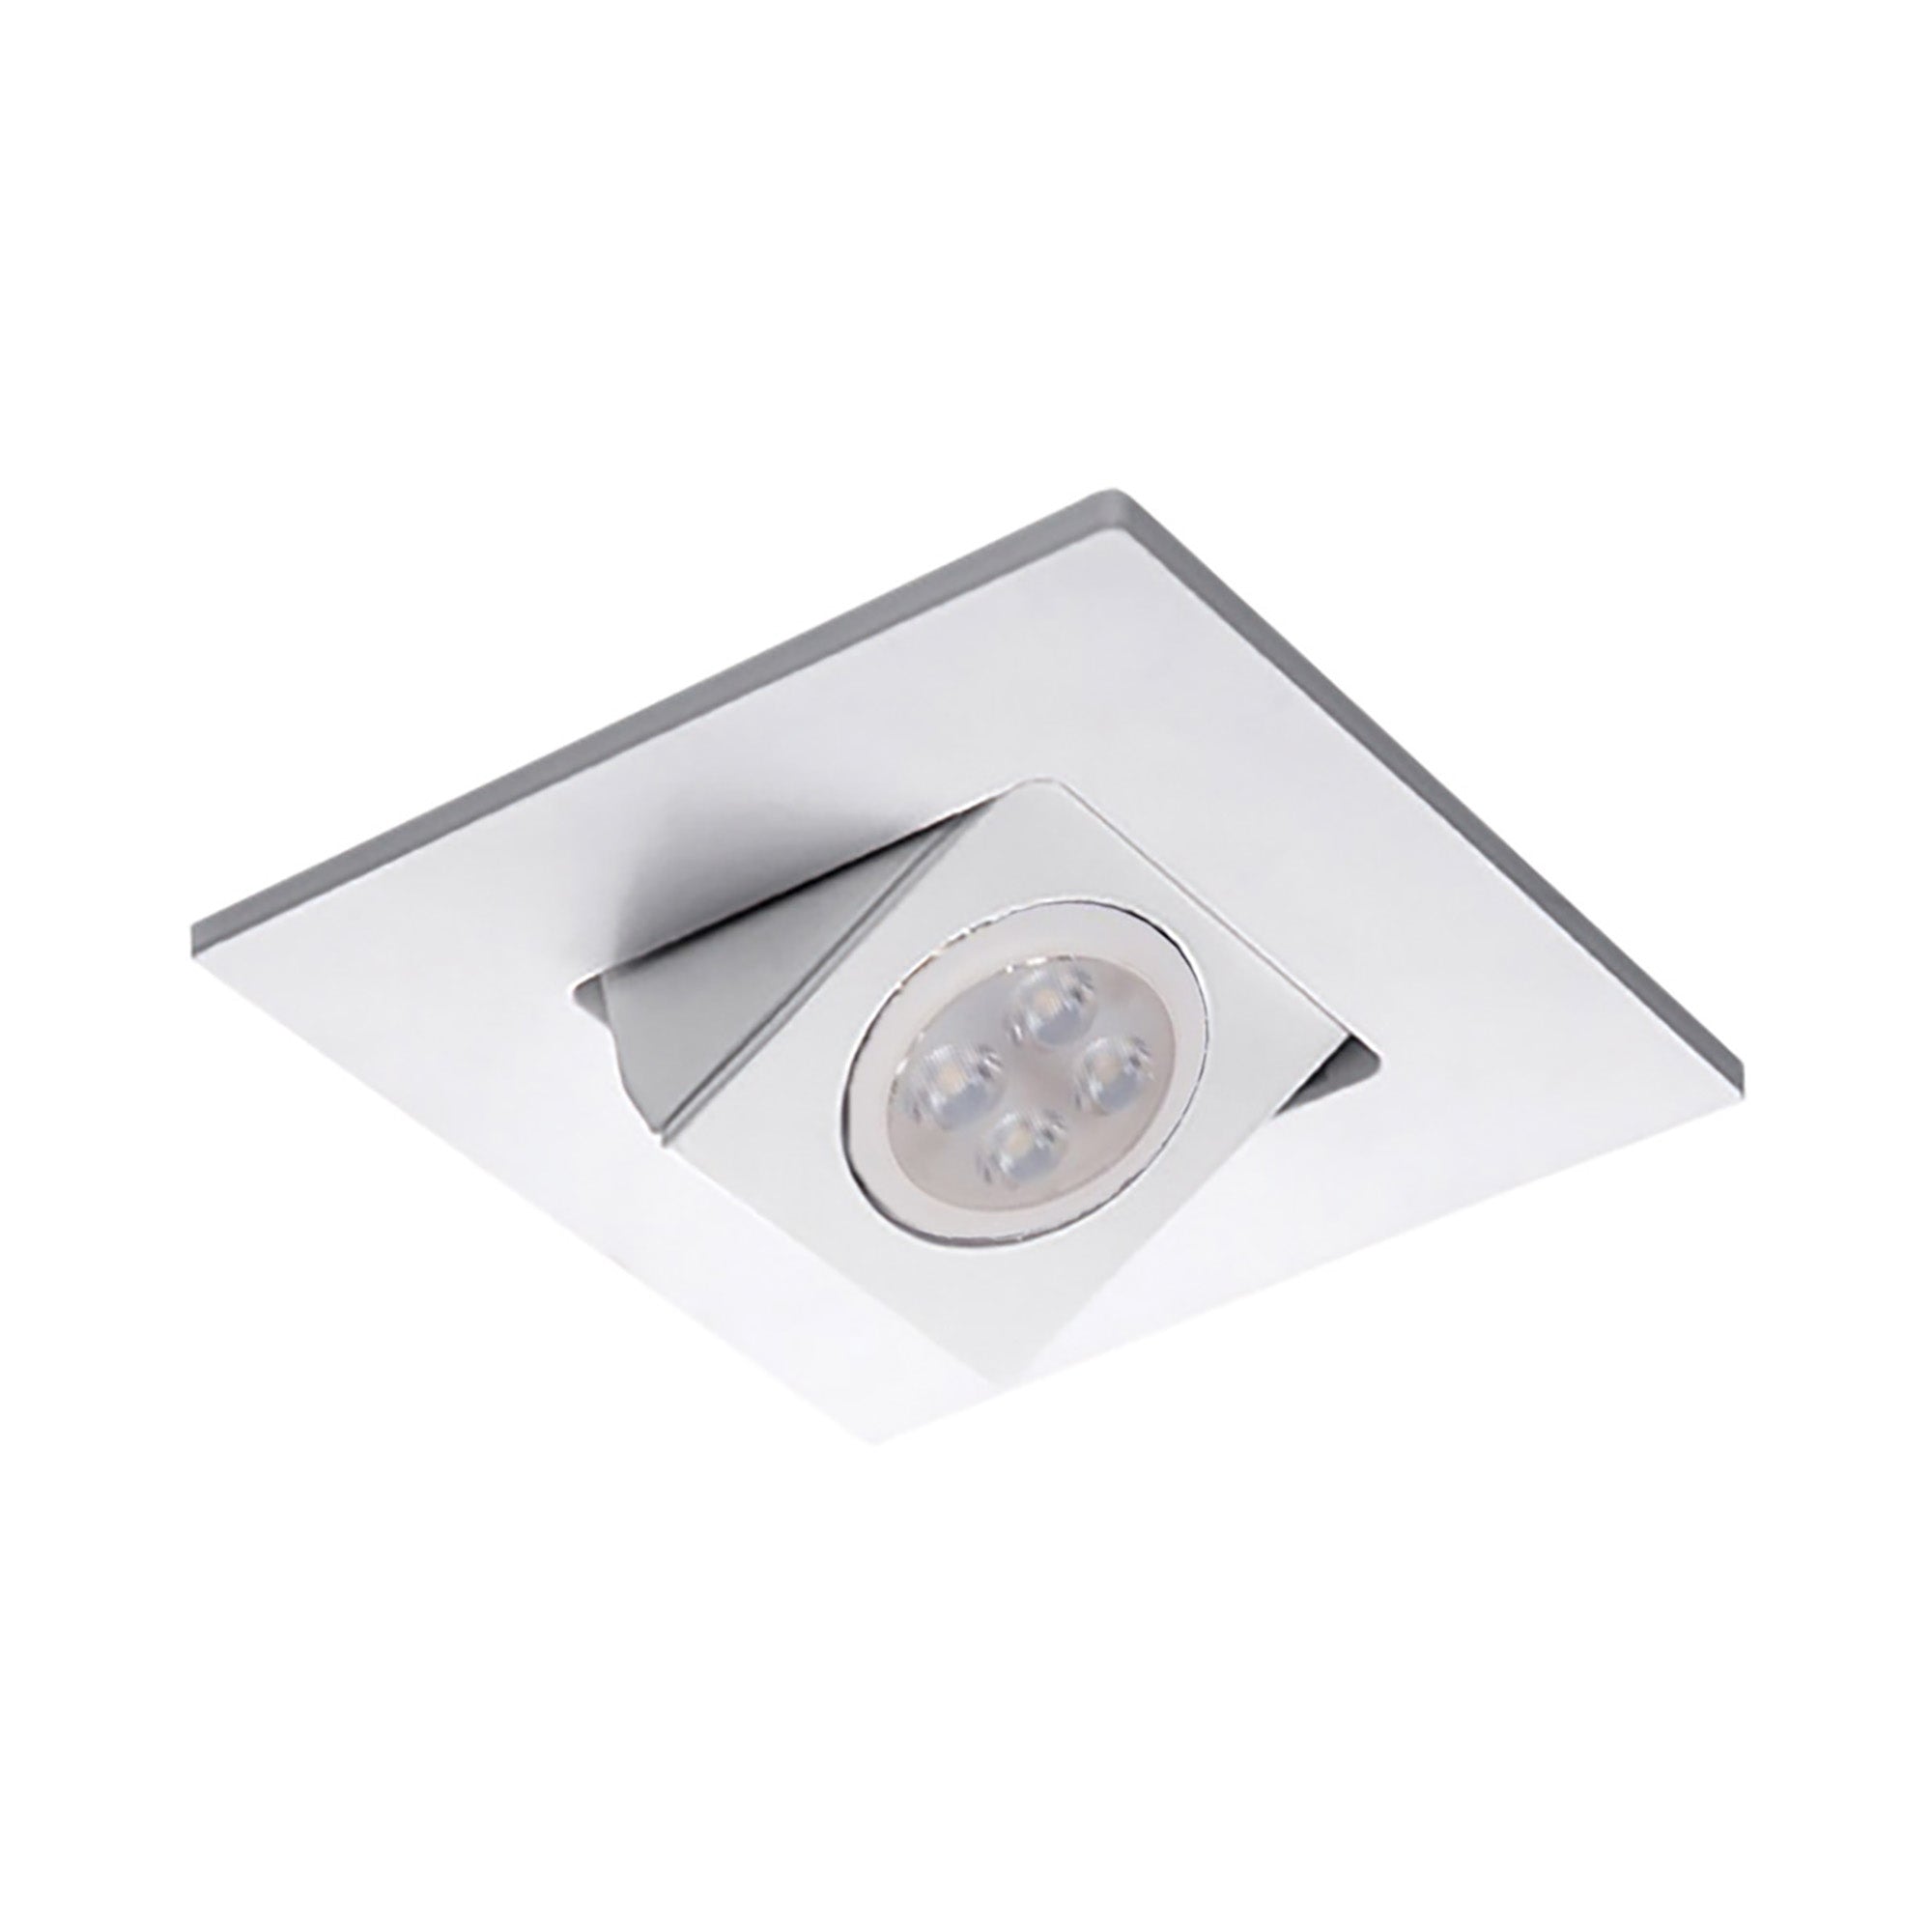 4" Square Adjustable Trim with LED Bulb